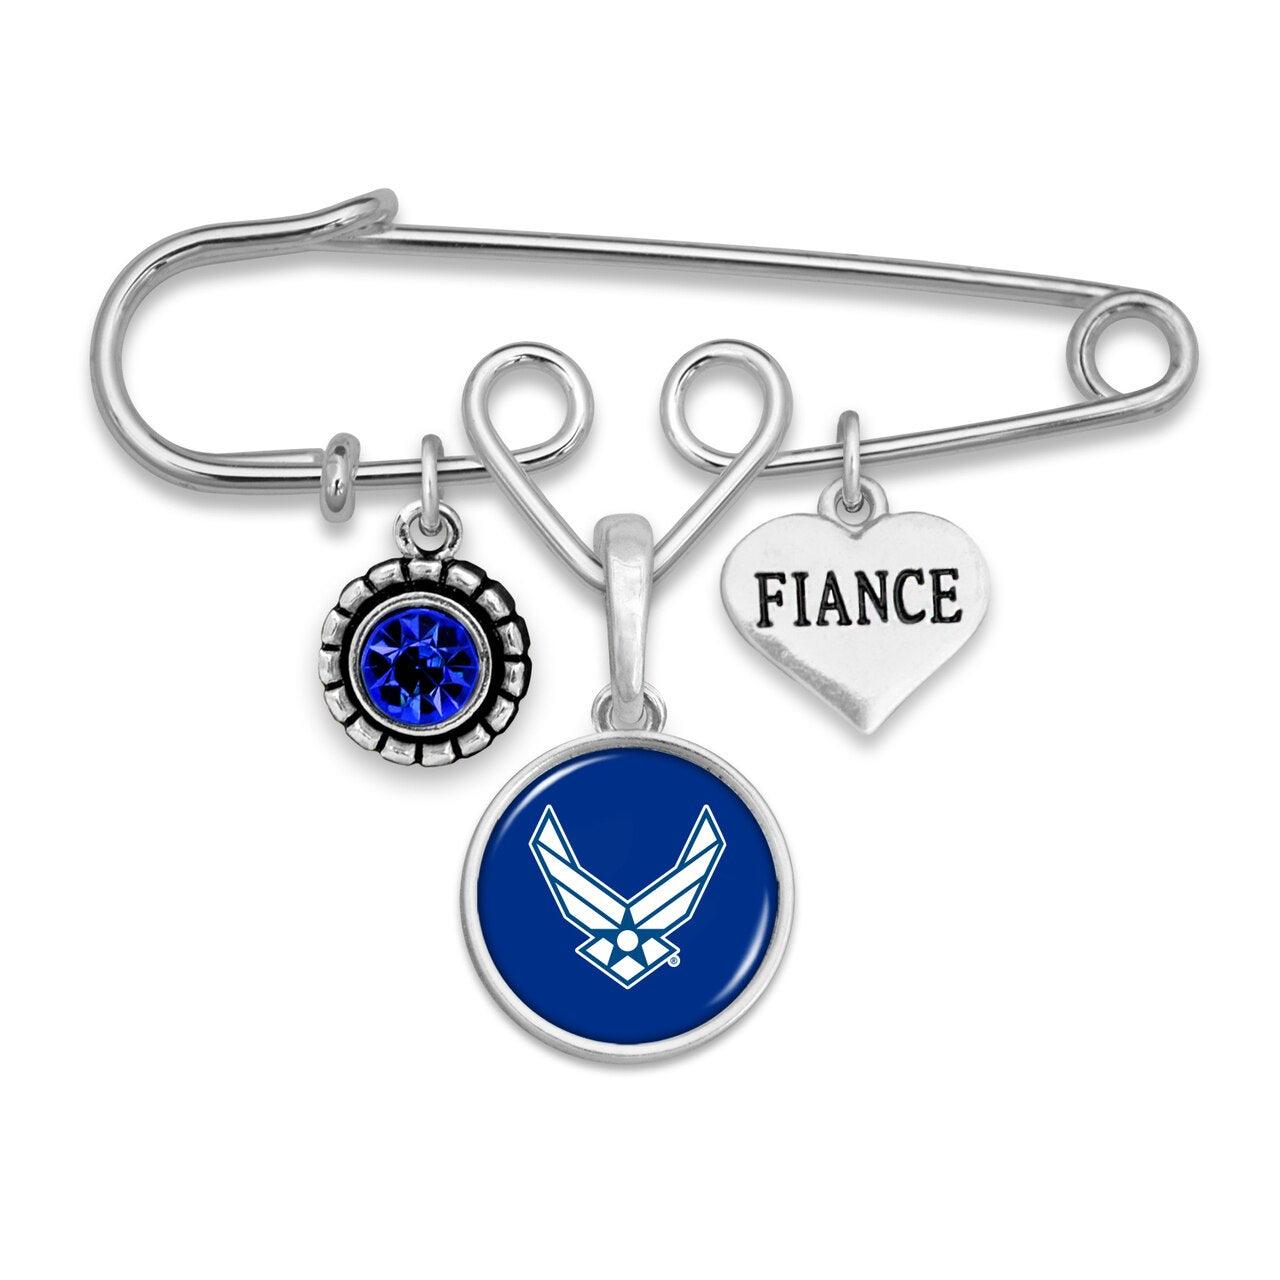 U.S. Air Force Fiance Accent Charm Brooch - Military Republic